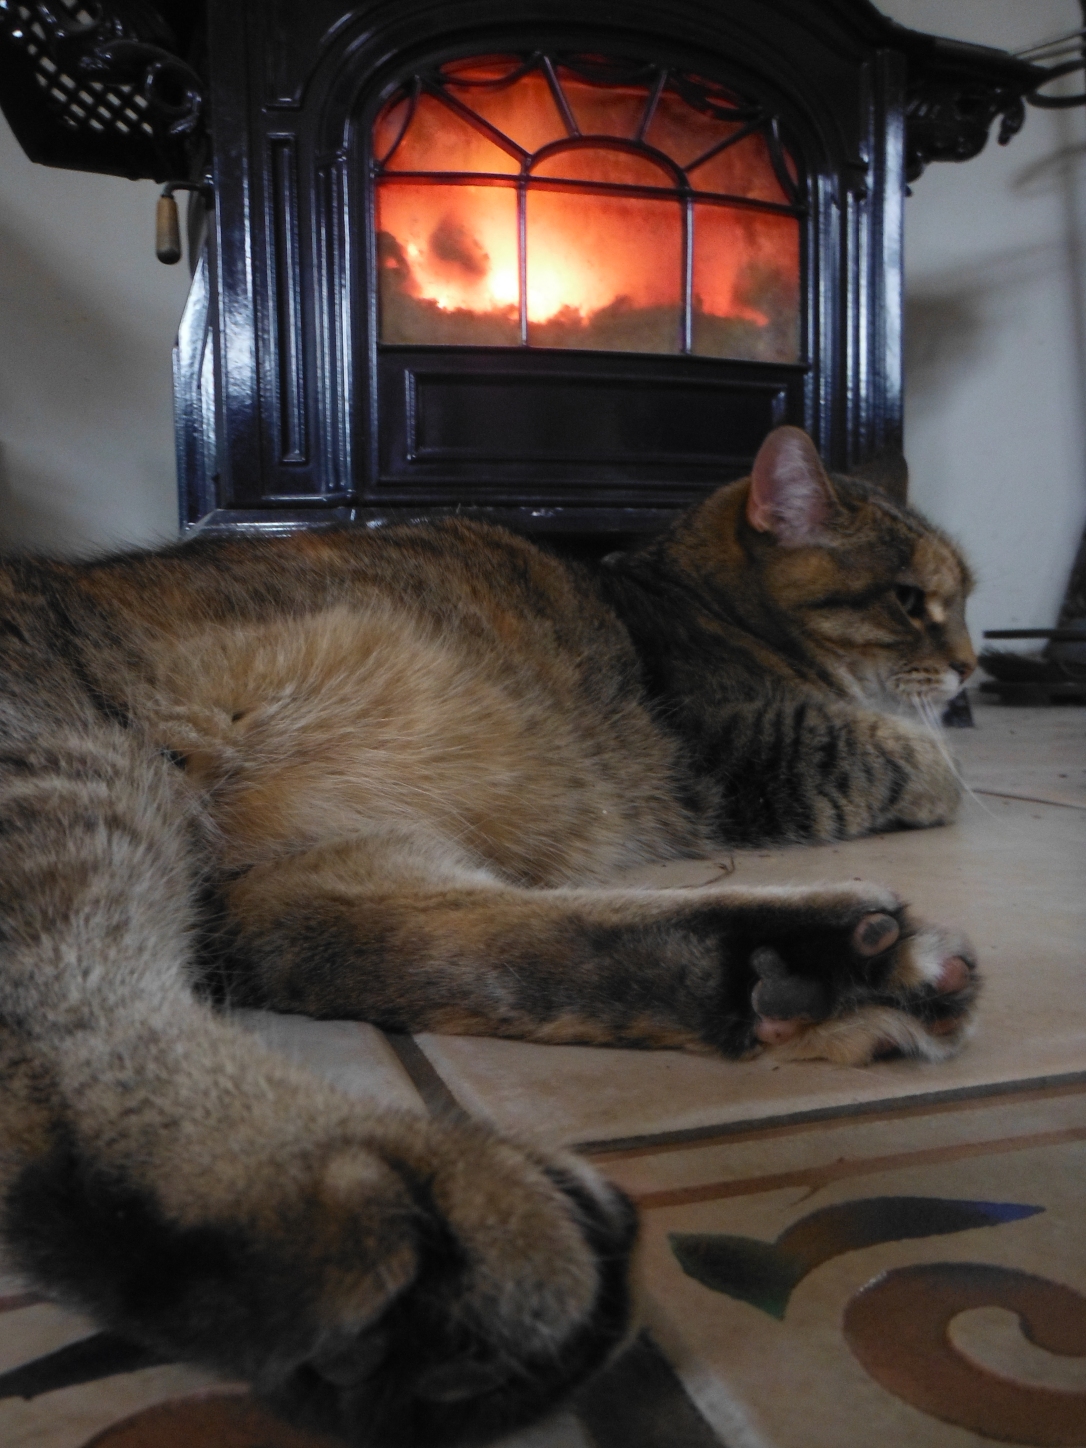 After six weeks of unrest, our foster feline has finally assumed her rightful place by the fire, with three dogs looking on in awe. Peace on earth and goodwill towards all creatures. Here we grow in 2013!